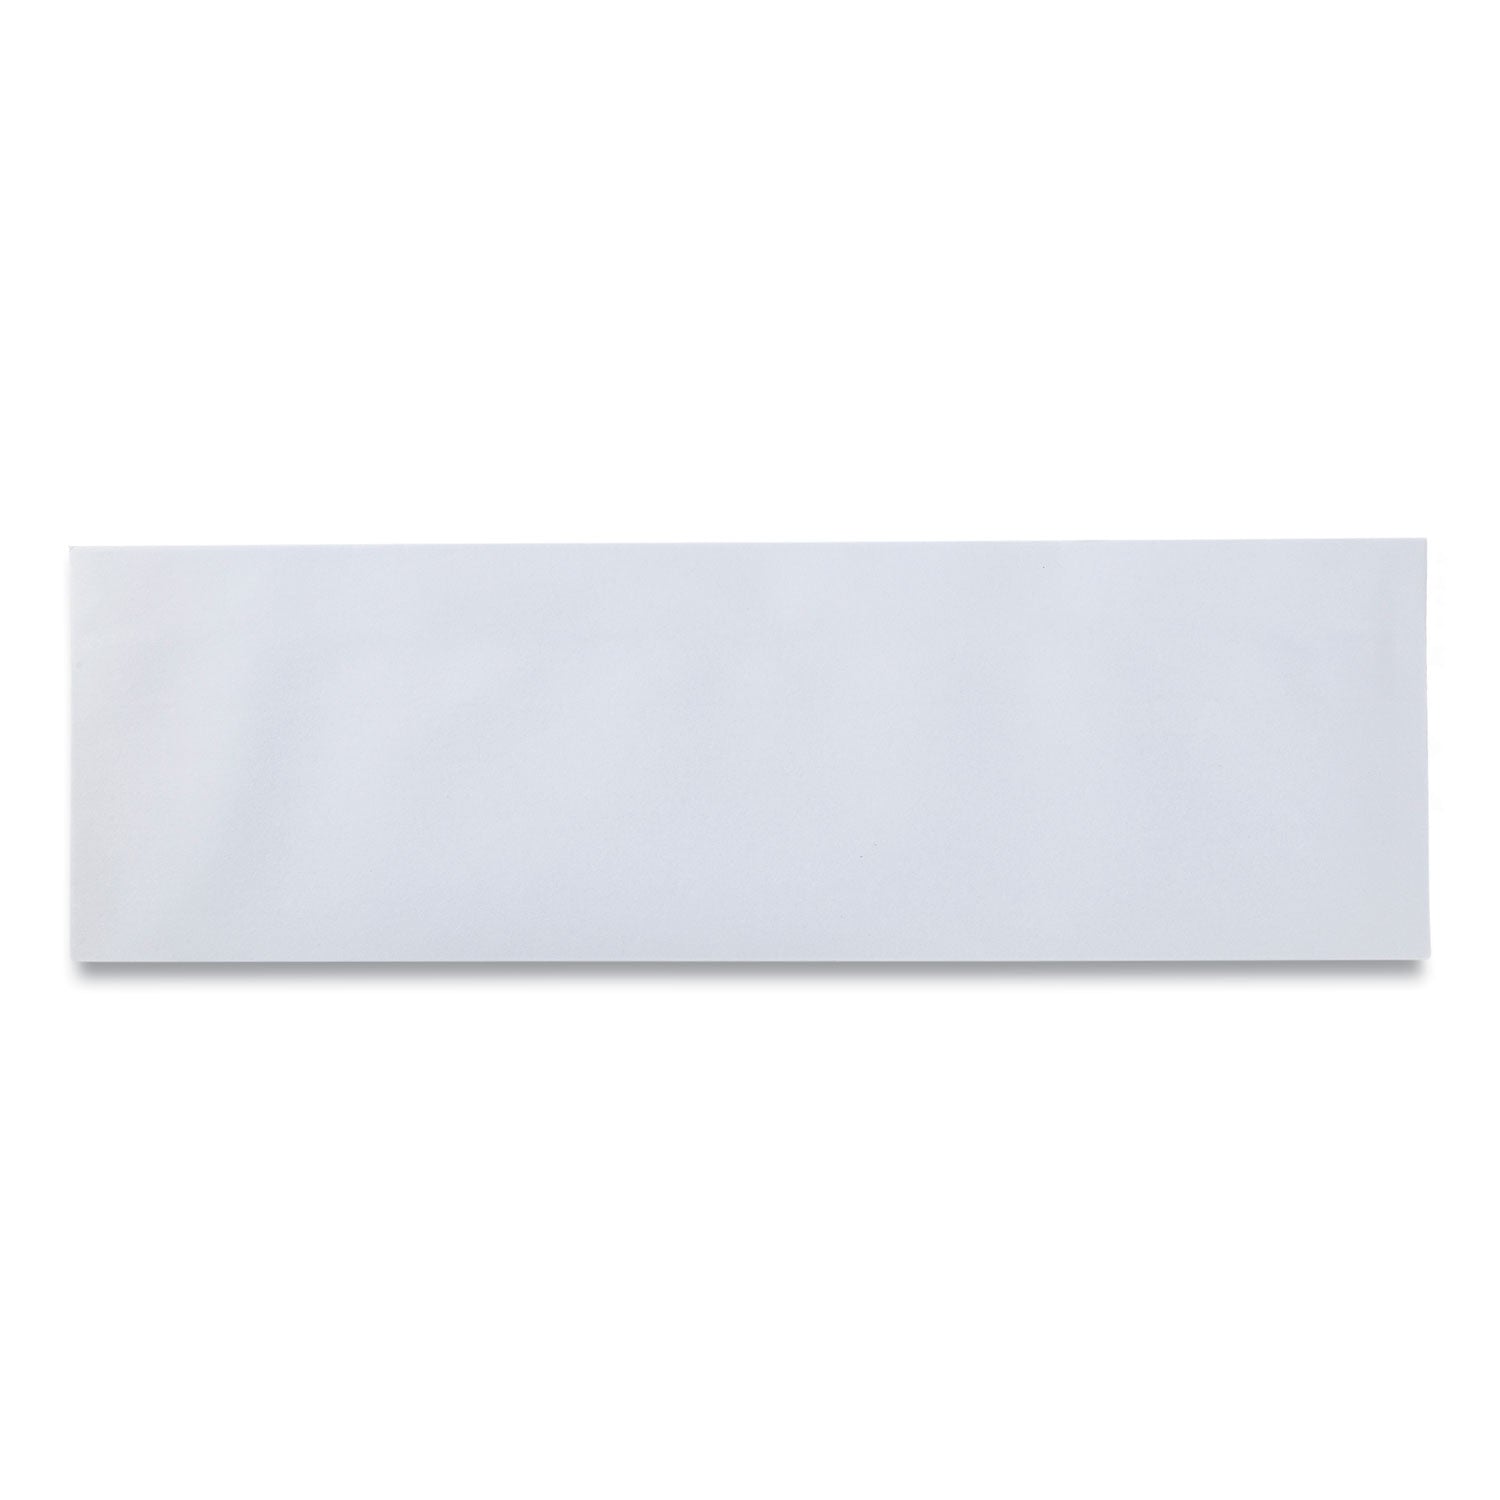 classy-cap-crepe-paper-adjustable-one-size-fits-all-white-100-caps-pack-10-packs-carton_rpprcc2w - 2